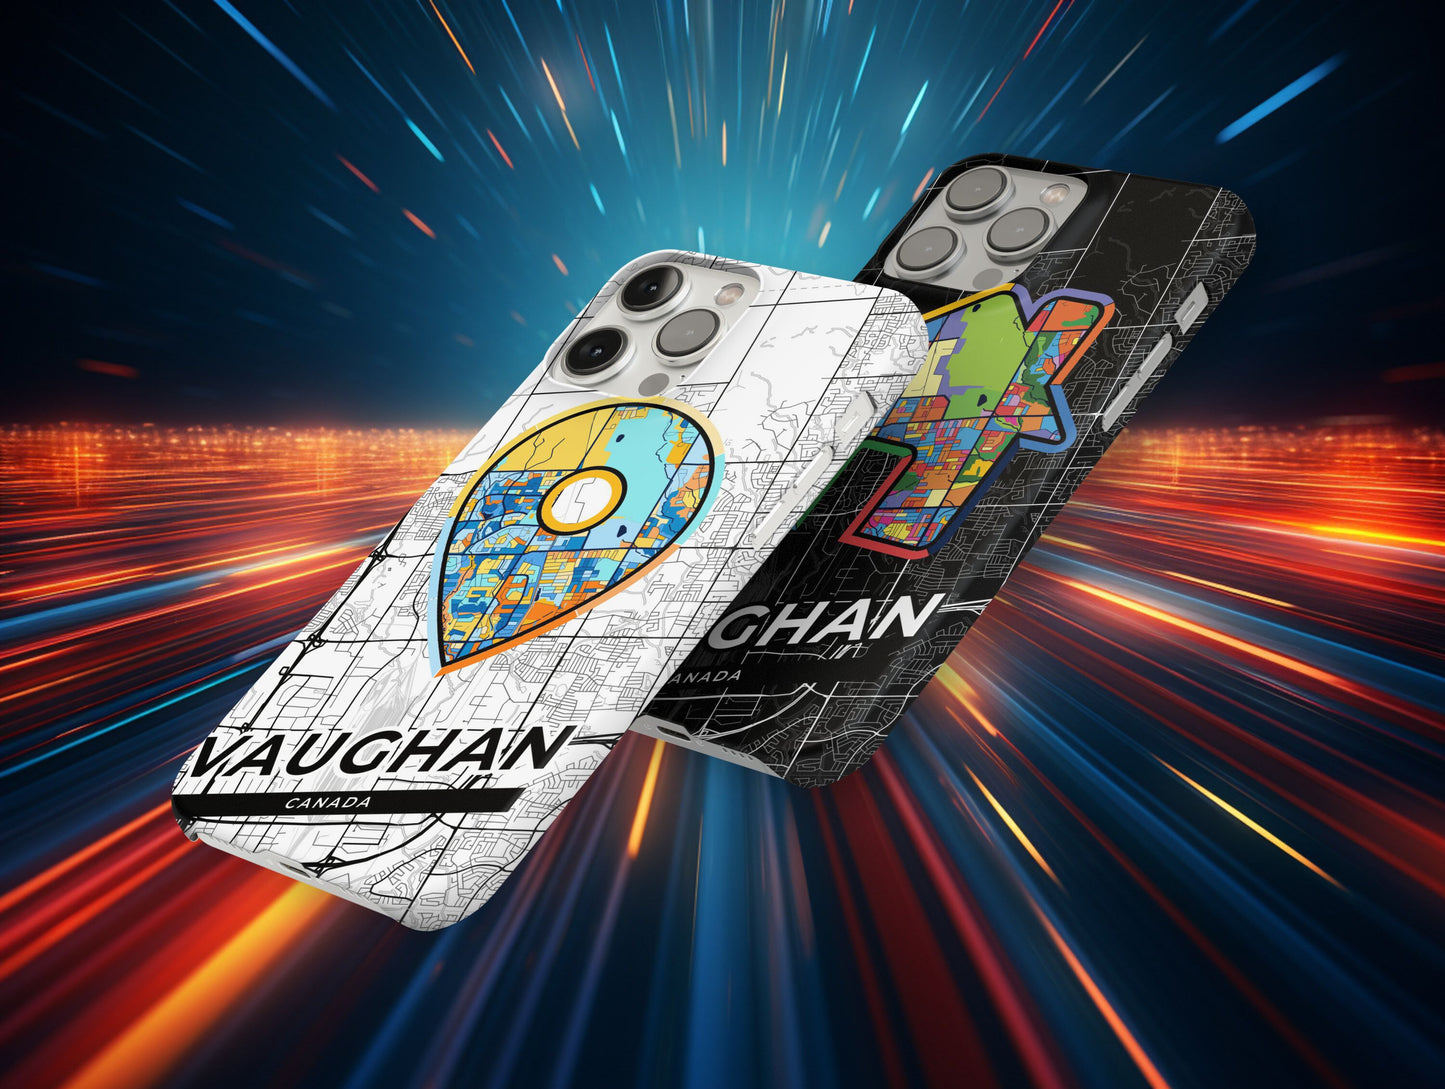 Vaughan Canada slim phone case with colorful icon